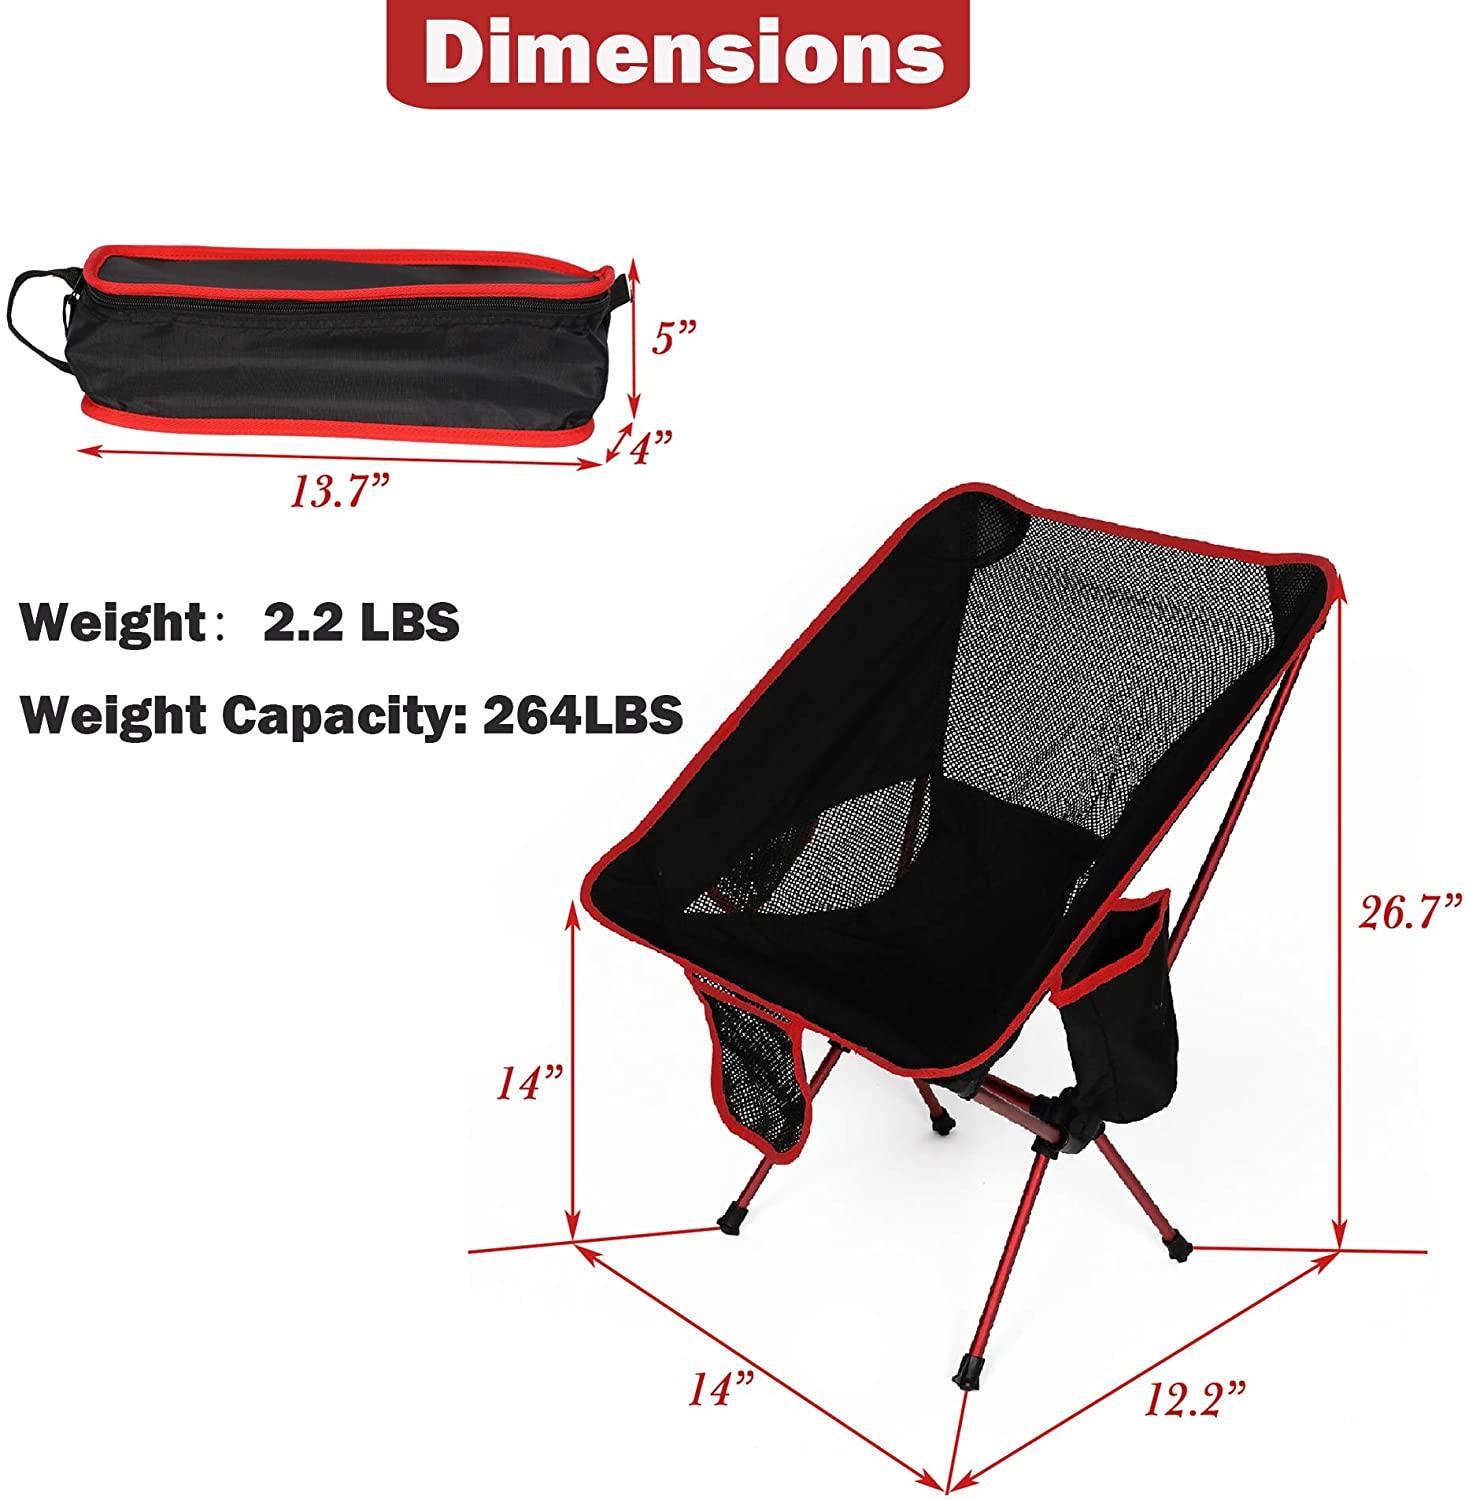 Folding Camping Chair Portable Compact Ultralight Outdoor Backpacking Fishing Chairs with Carry Bag - Bosonshop